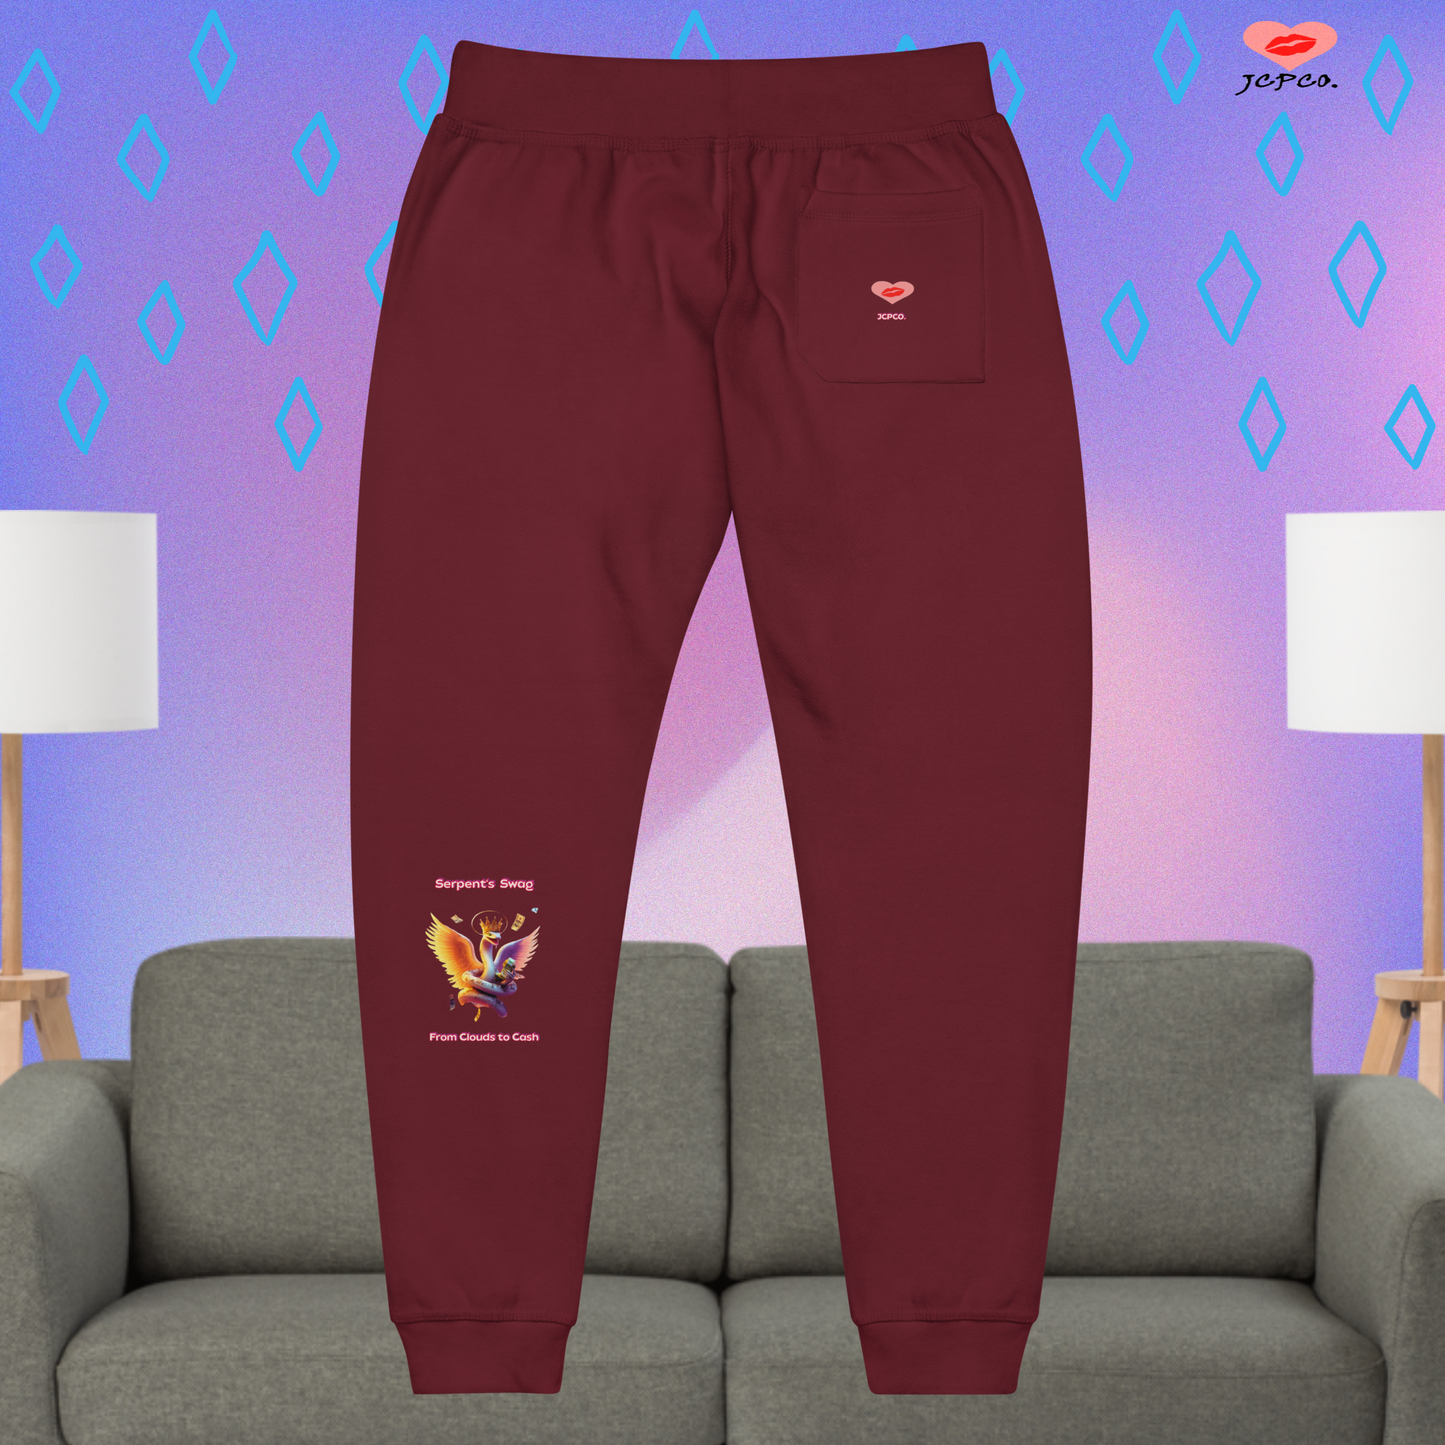 👑Devious Majesty Serpent's Swag 🐍 From Clouds to Cash💵Unisex fleece sweatpants👖